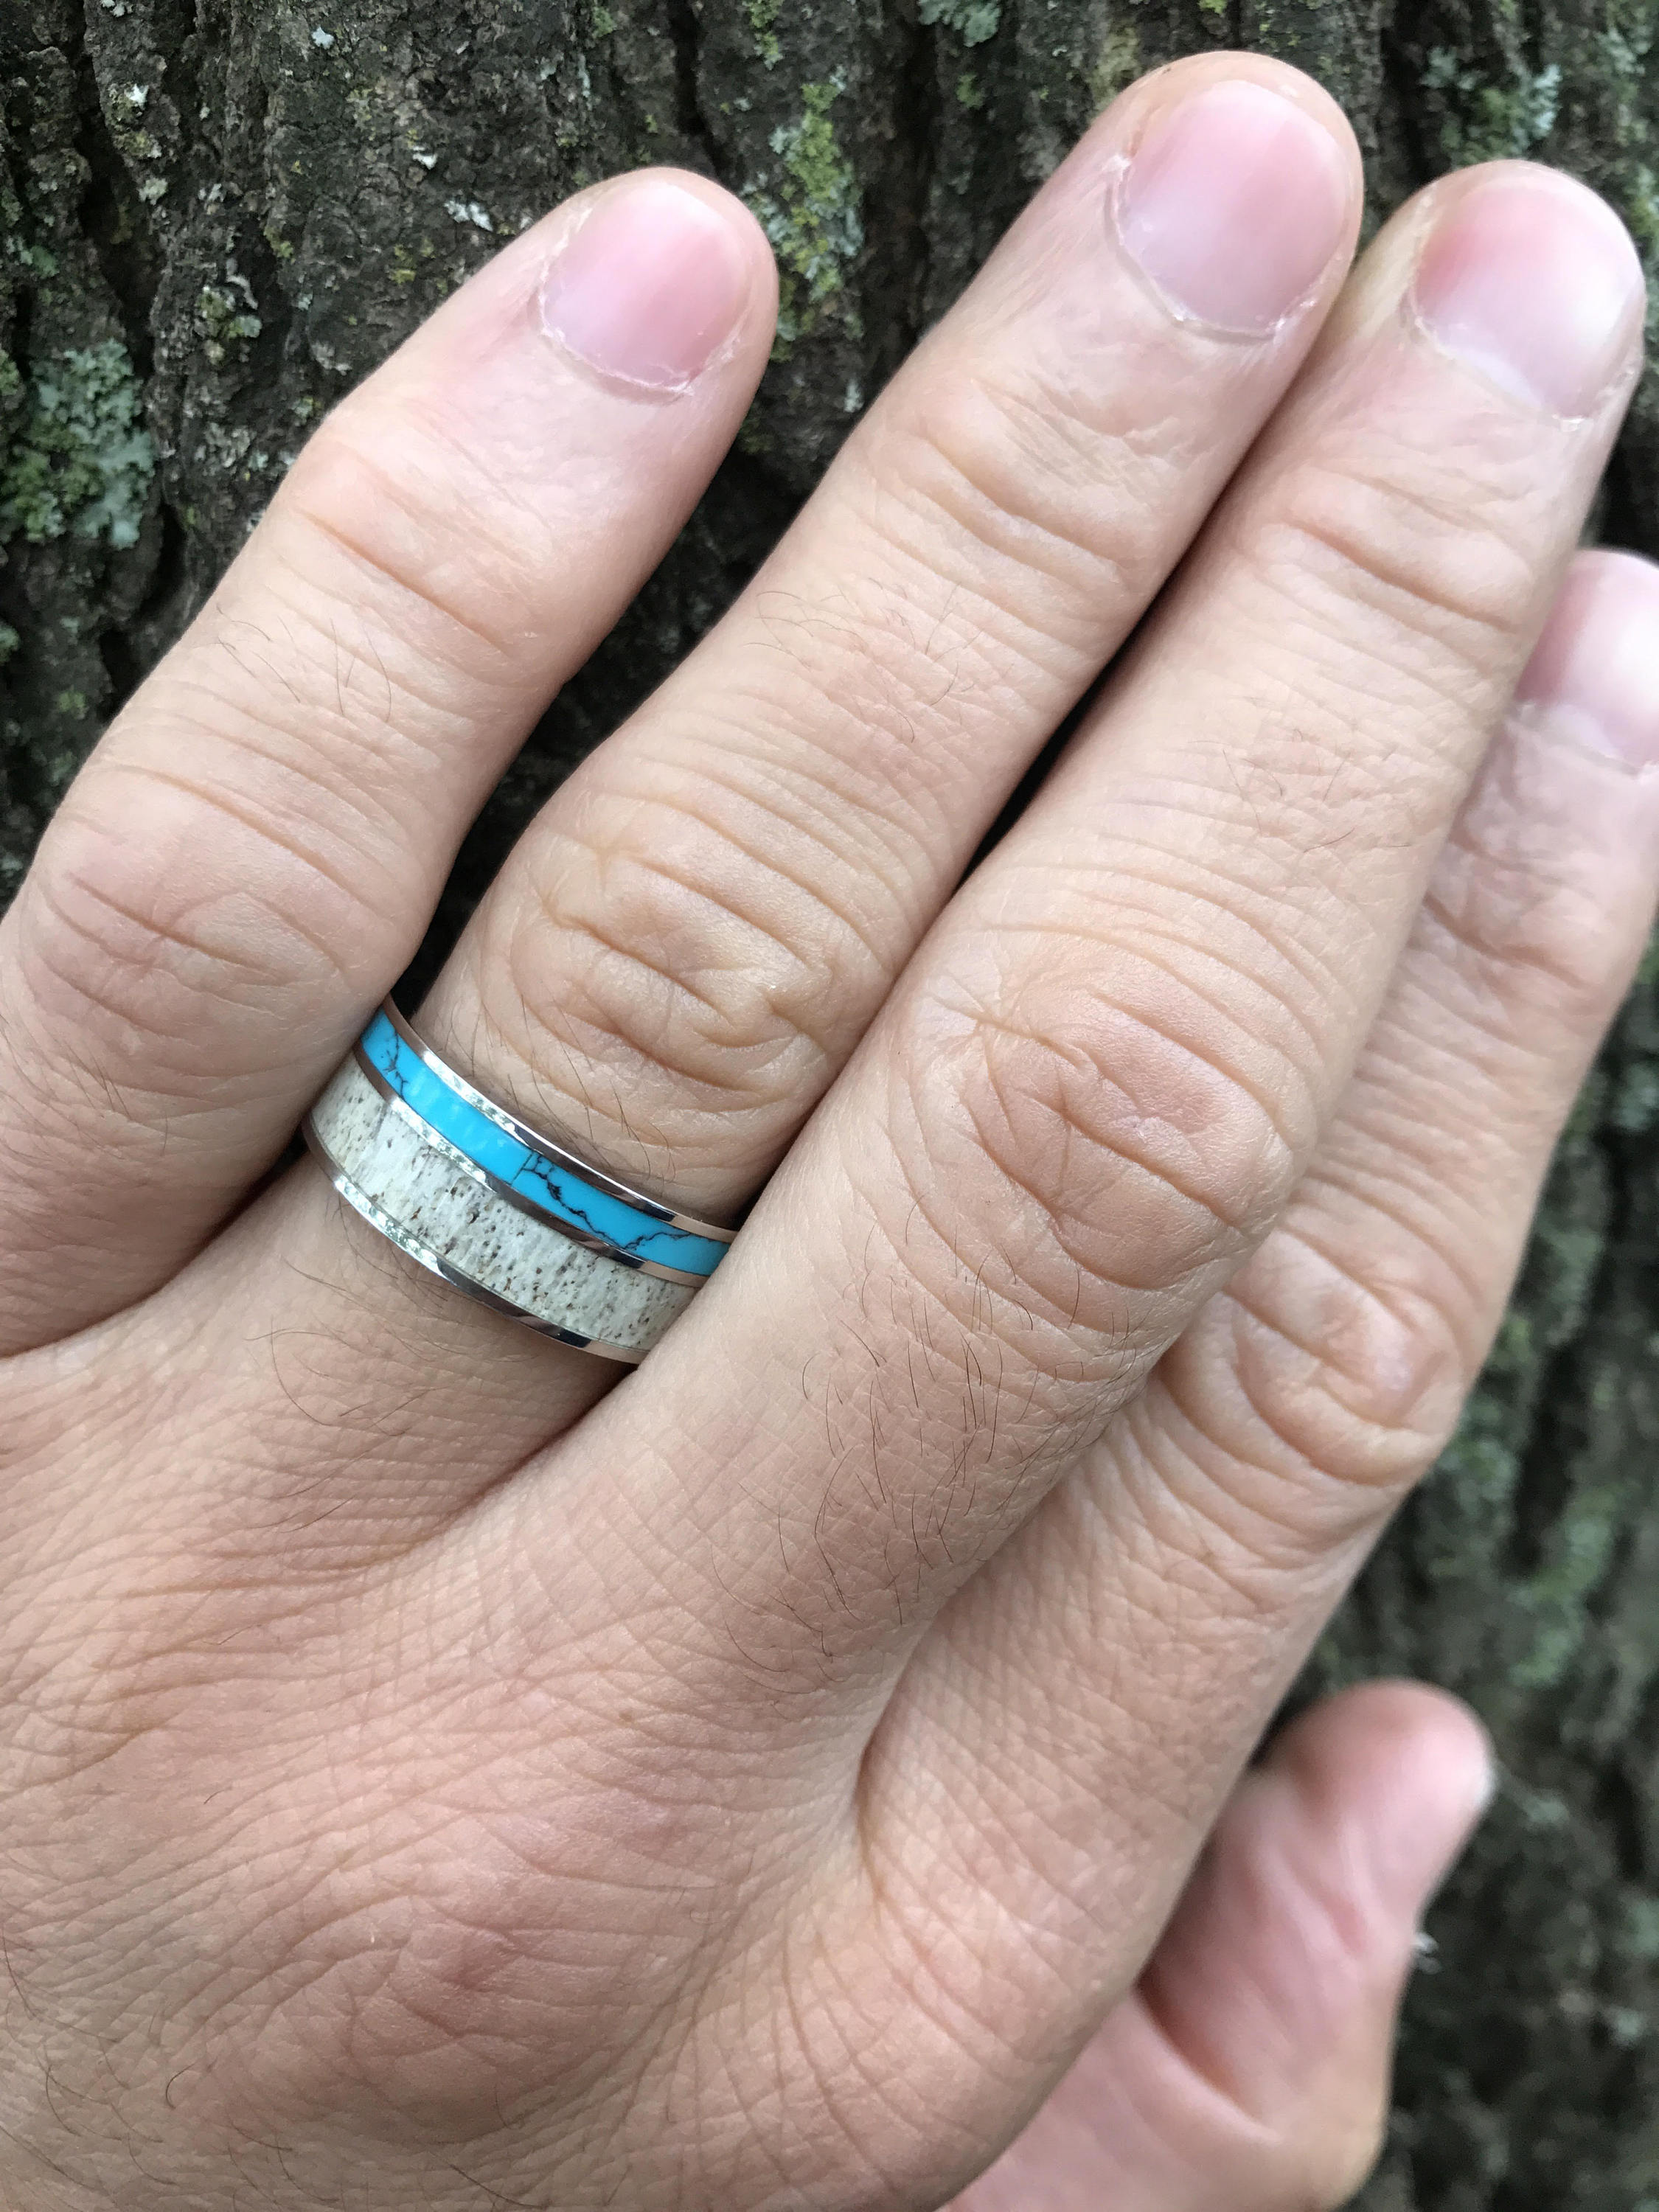 Deer Antler Ring with Turquoise Inlay - Unisex Turquoise Band Wedding Ring